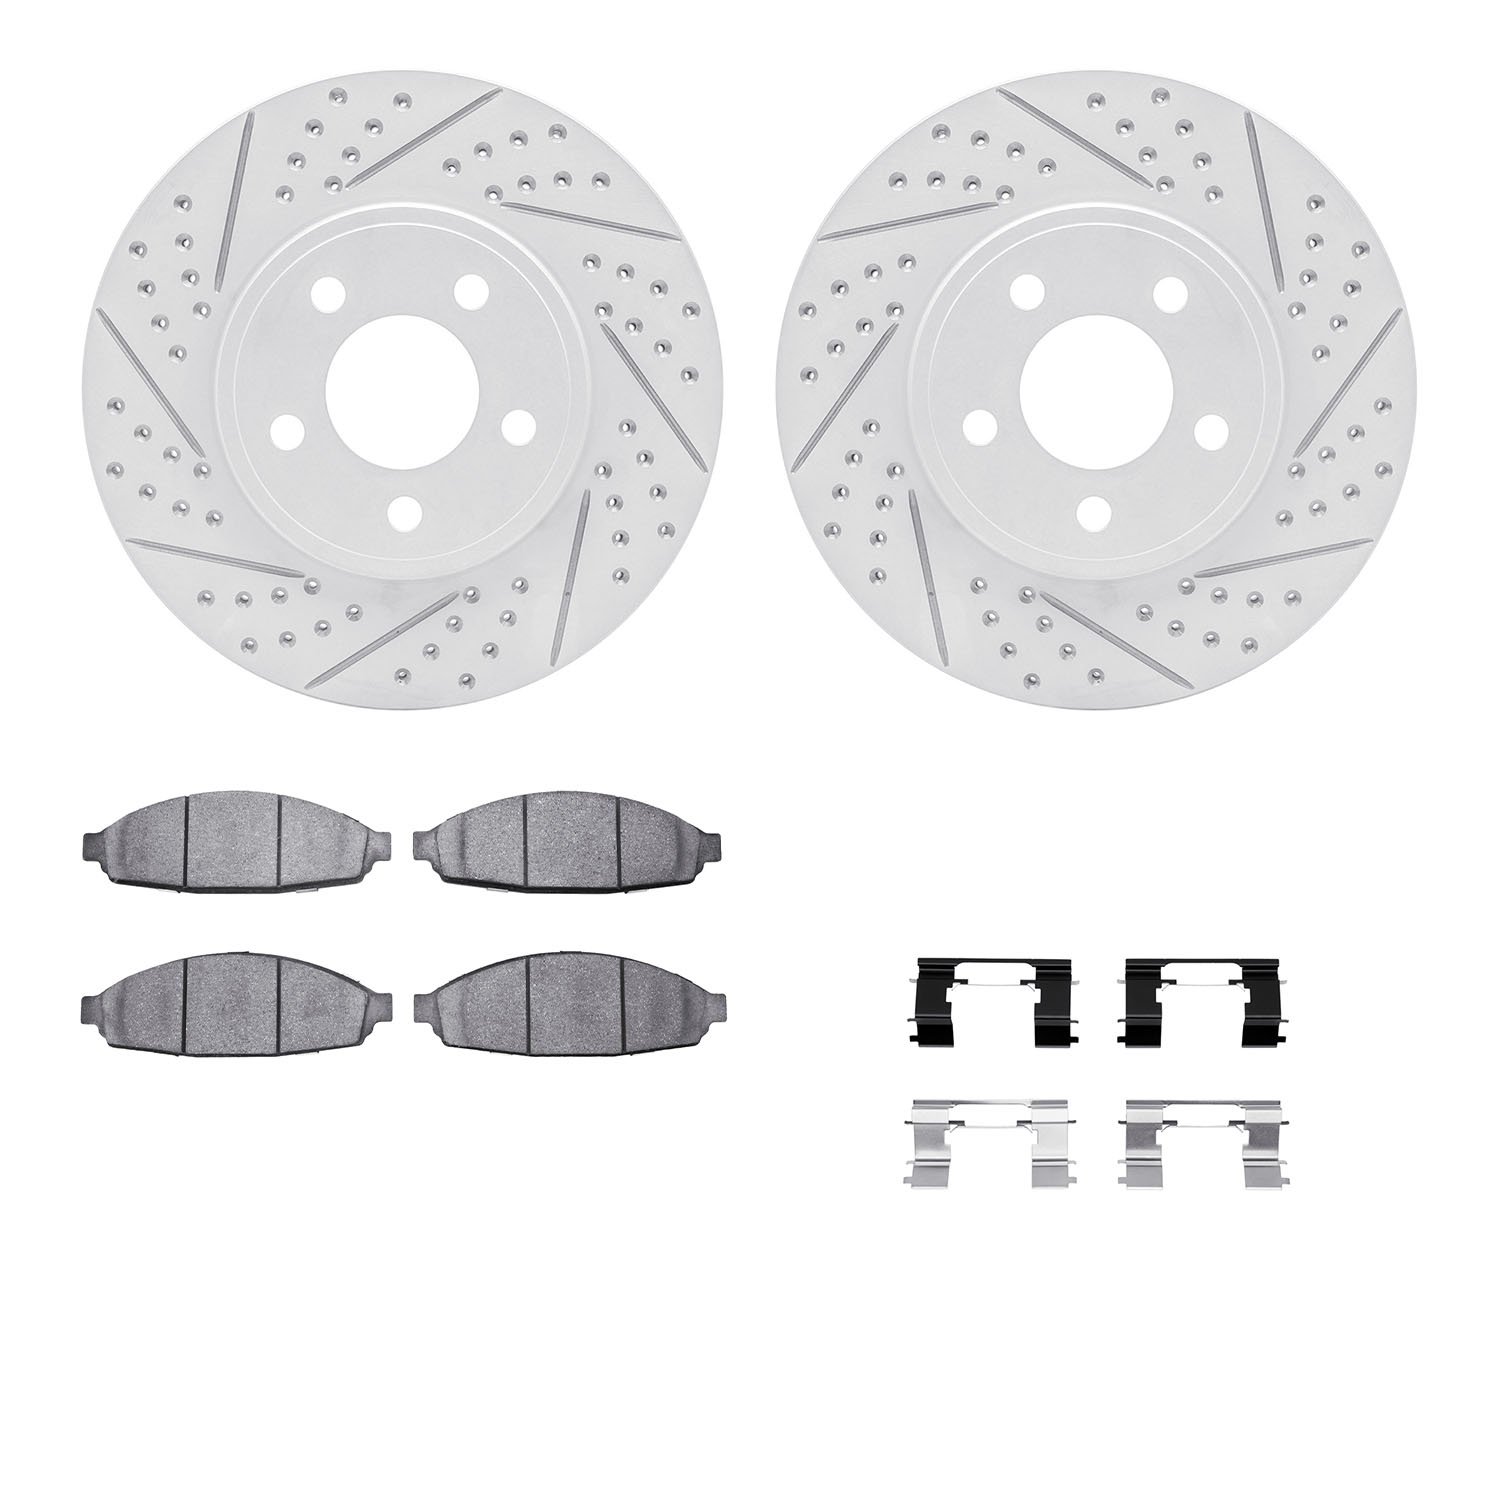 2212-56007 Geoperformance Drilled/Slotted Rotors w/Heavy-Duty Pads Kit & Hardware, 2003-2011 Ford/Lincoln/Mercury/Mazda, Positio